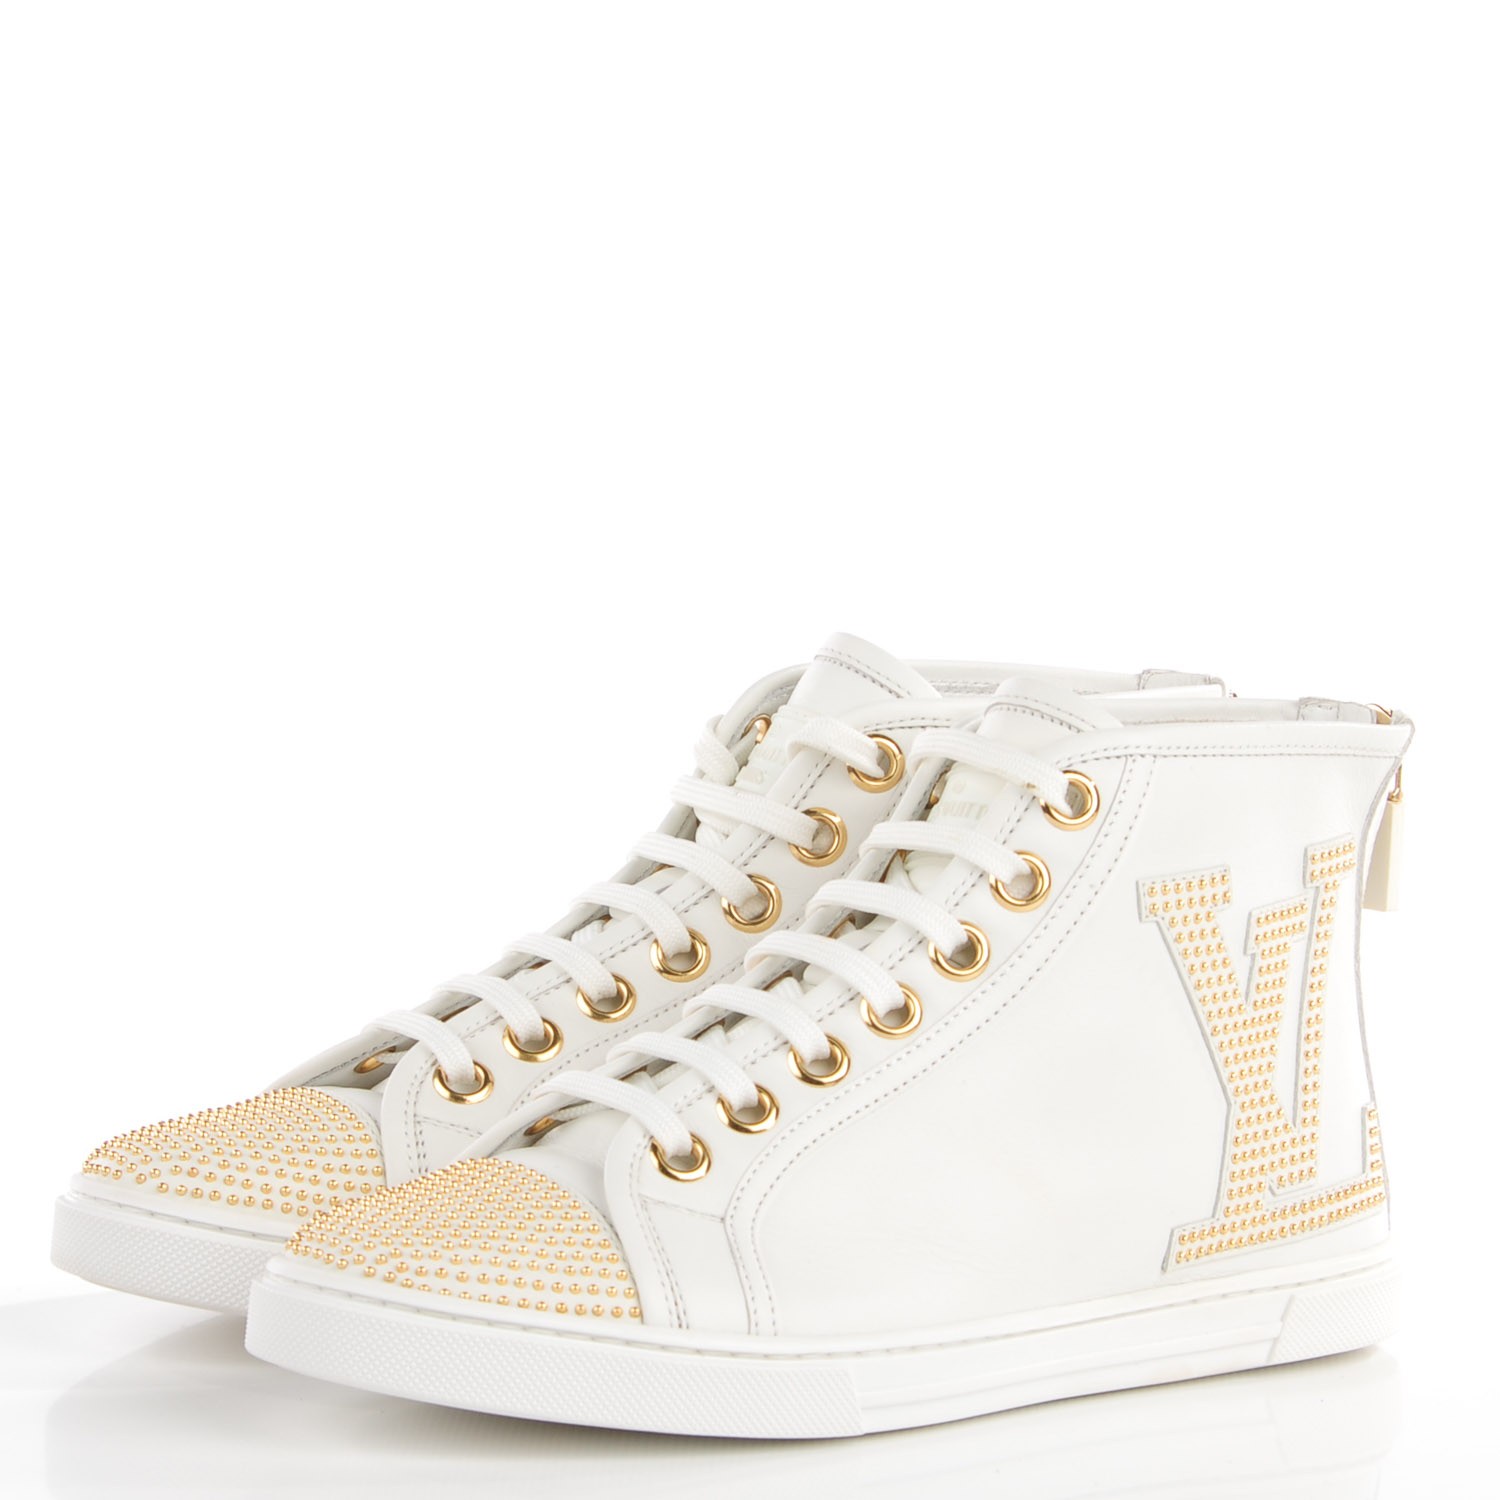 LOUIS VUITTON Leather Studded Punchy High Top Sneakers 36 White Gold ...